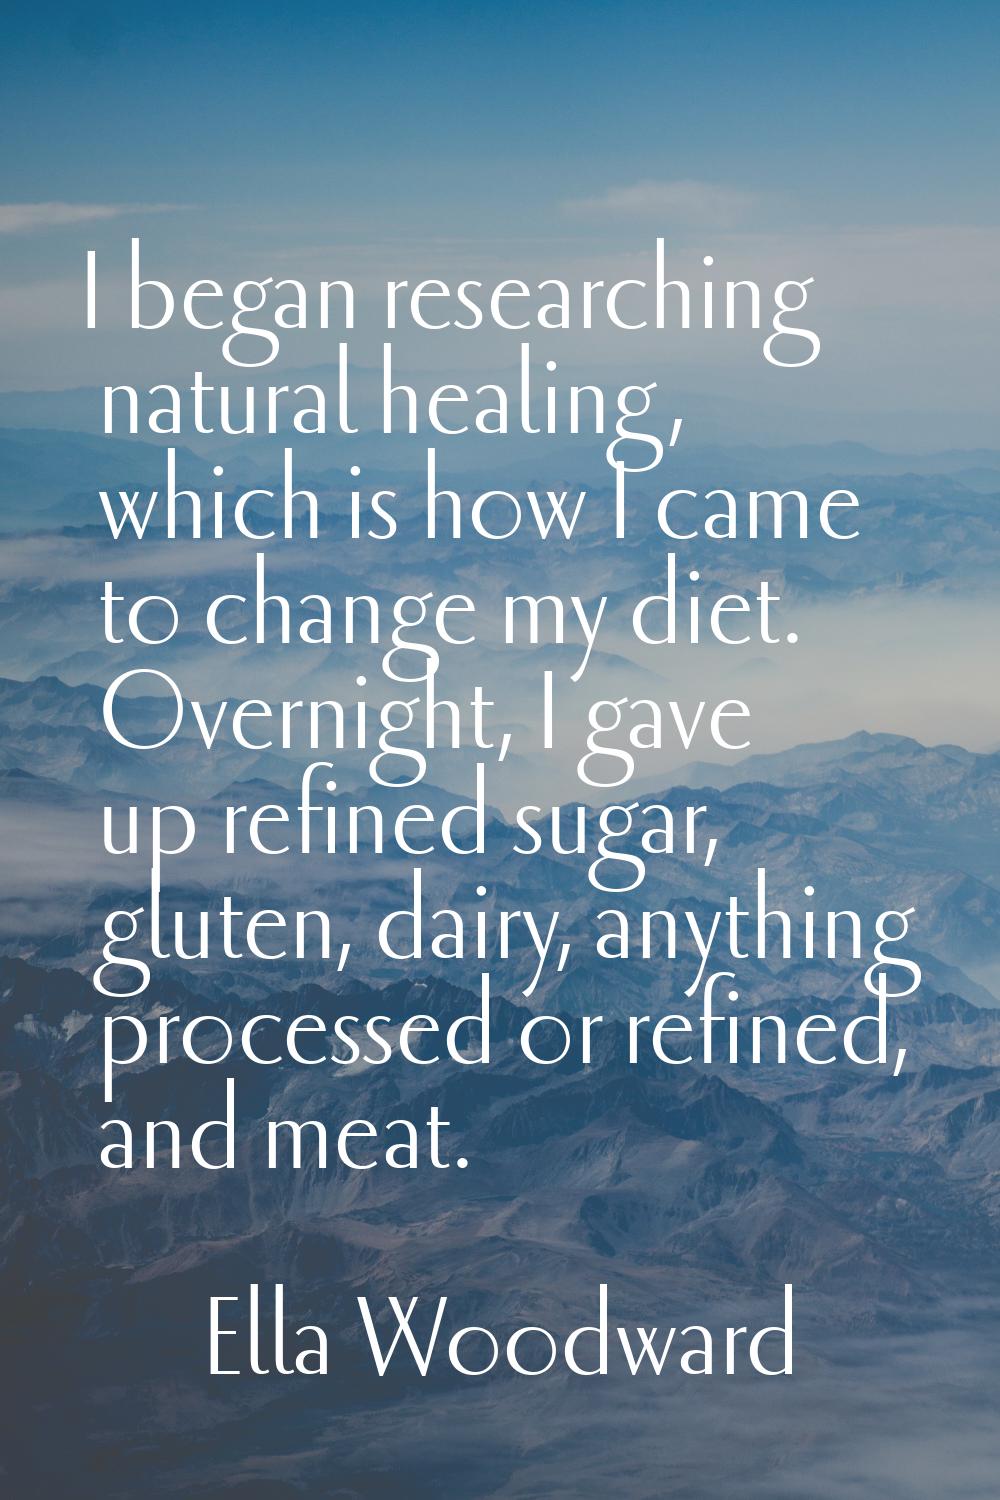 I began researching natural healing, which is how I came to change my diet. Overnight, I gave up re